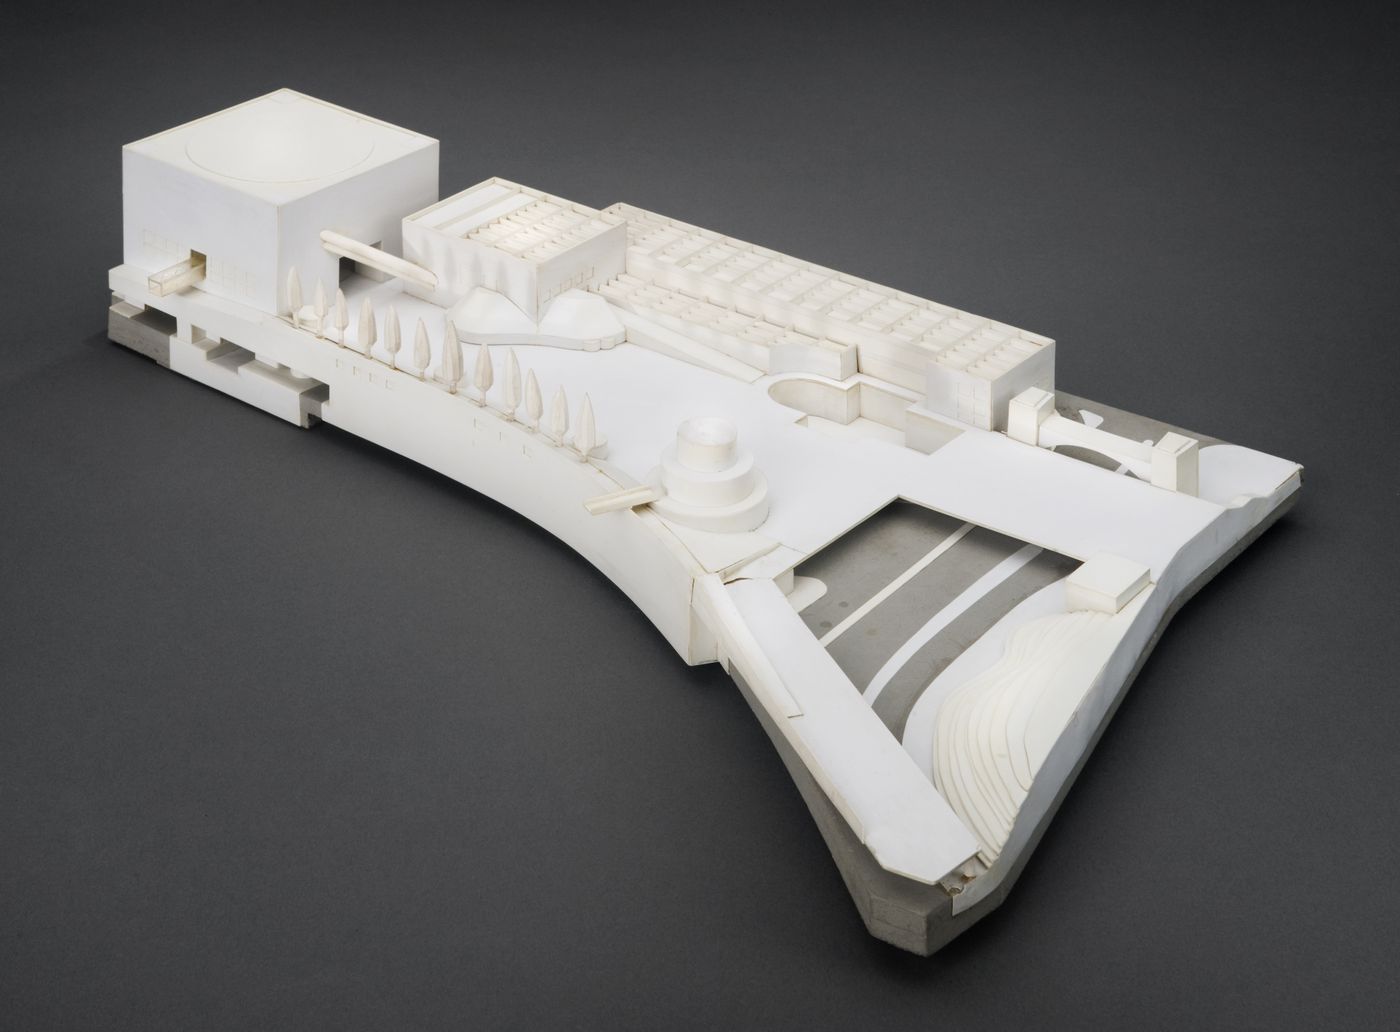 Wallraf-Richartz-Museum, Cologne, Germany: competition model